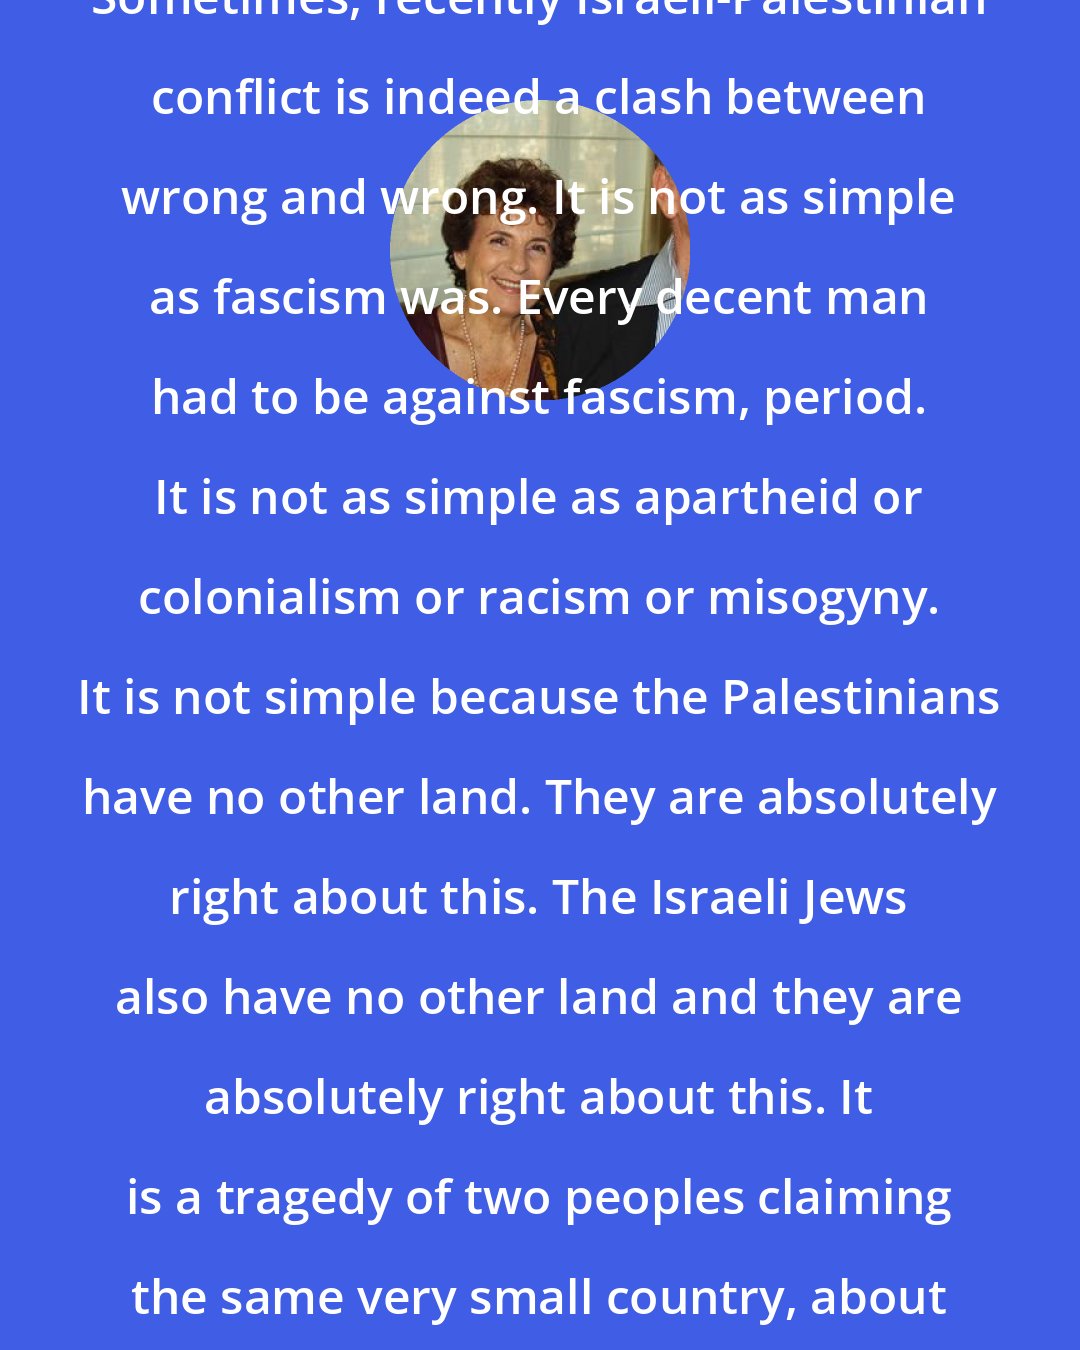 Amos Oz: Sometimes, recently Israeli-Palestinian conflict is indeed a clash between wrong and wrong. It is not as simple as fascism was. Every decent man had to be against fascism, period. It is not as simple as apartheid or colonialism or racism or misogyny. It is not simple because the Palestinians have no other land. They are absolutely right about this. The Israeli Jews also have no other land and they are absolutely right about this. It is a tragedy of two peoples claiming the same very small country, about the size of New Jersey.